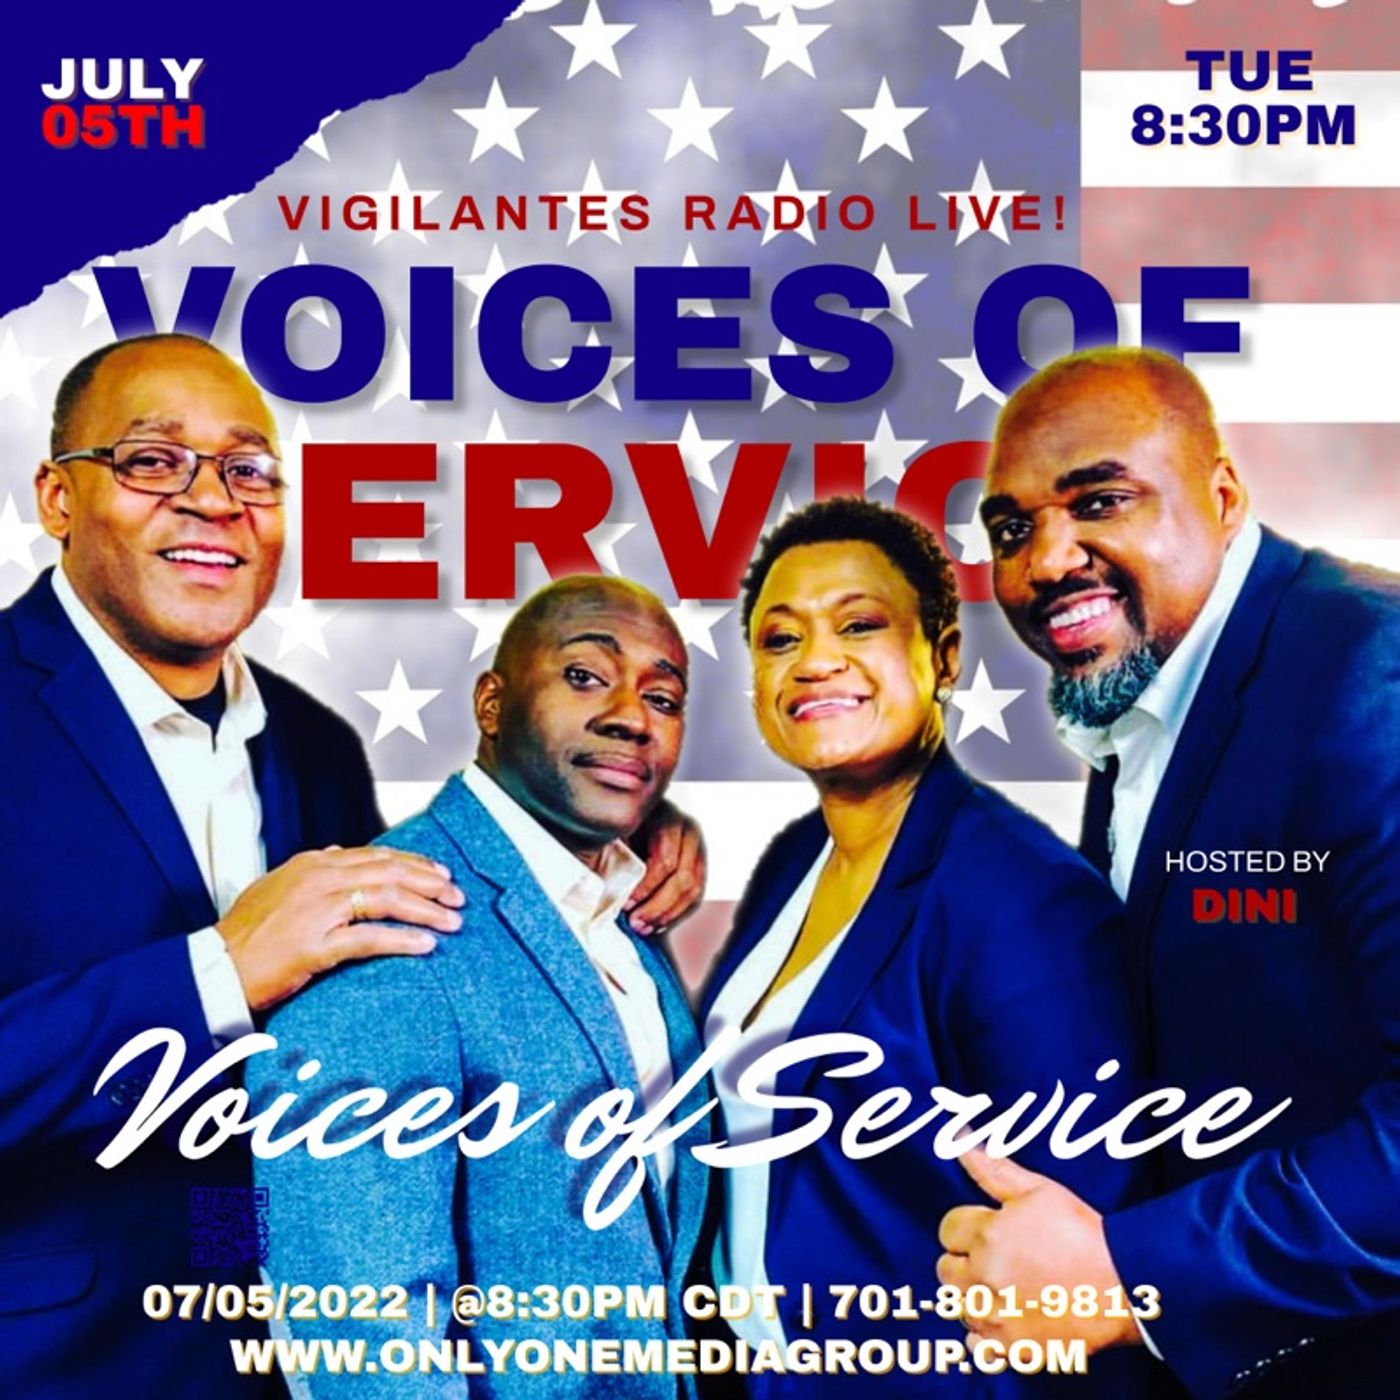 The Voices of Service Interview.